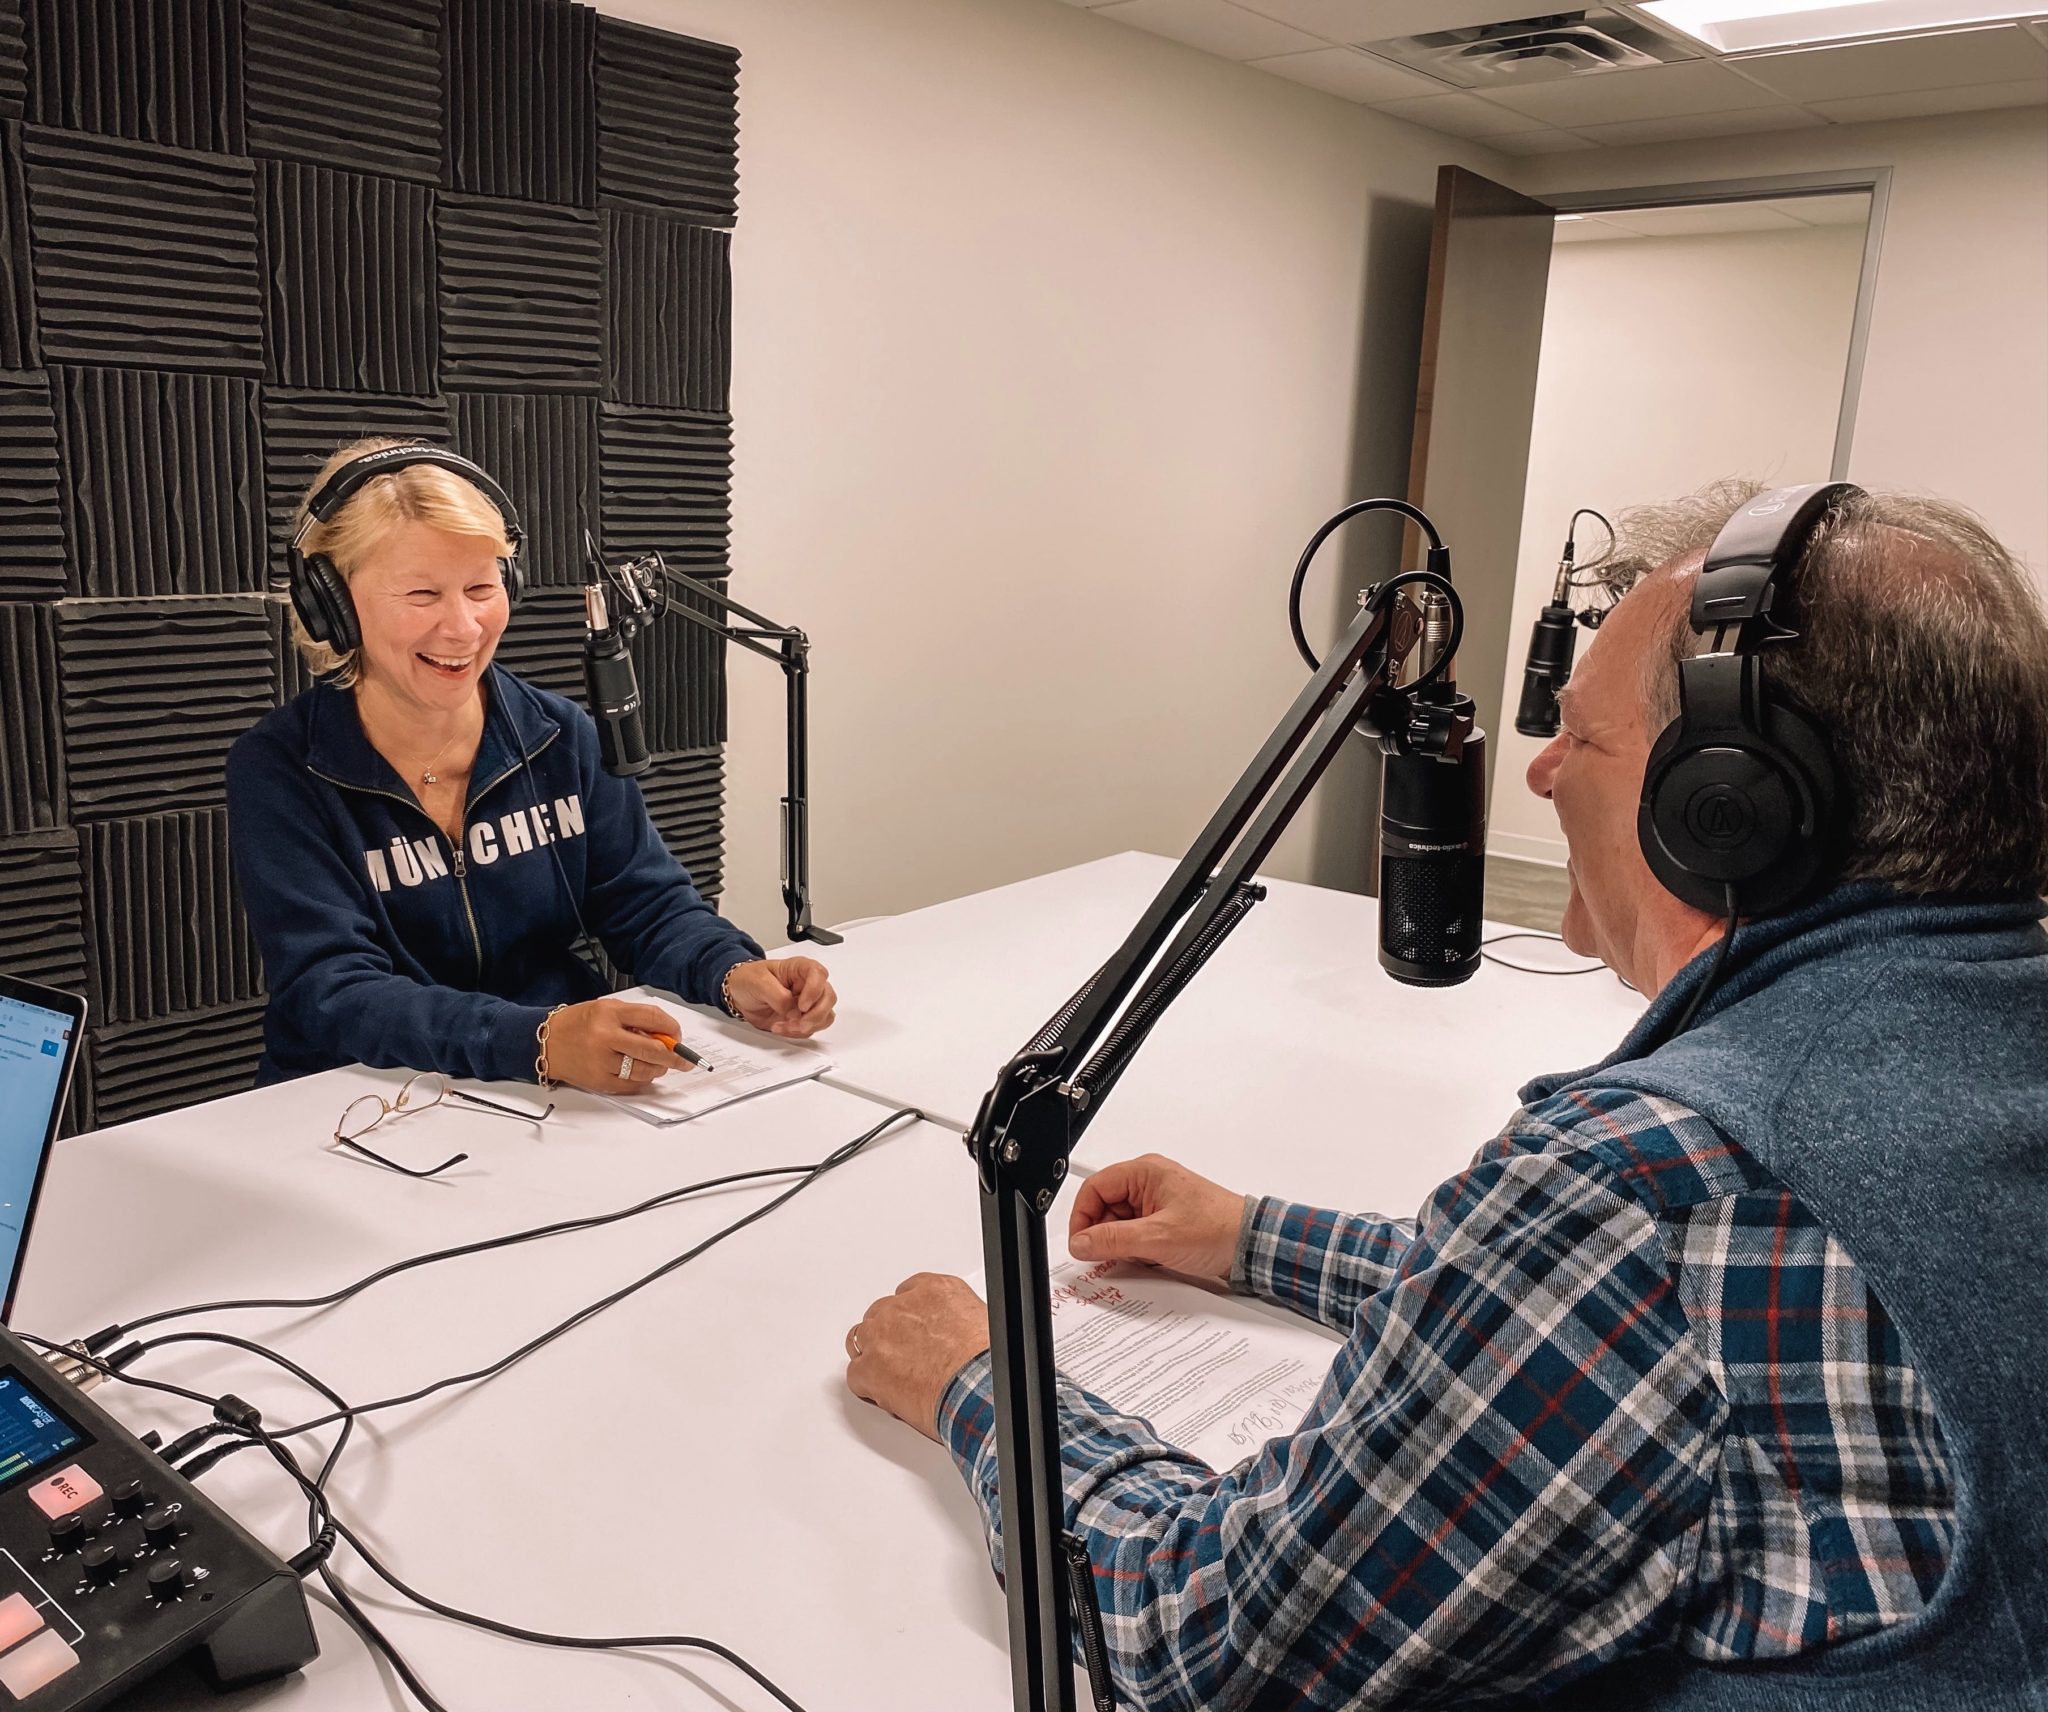 Executive Director, Candee Chambers, and employment law expert, John C. Fox, record an episode of the DE Talk Podcast